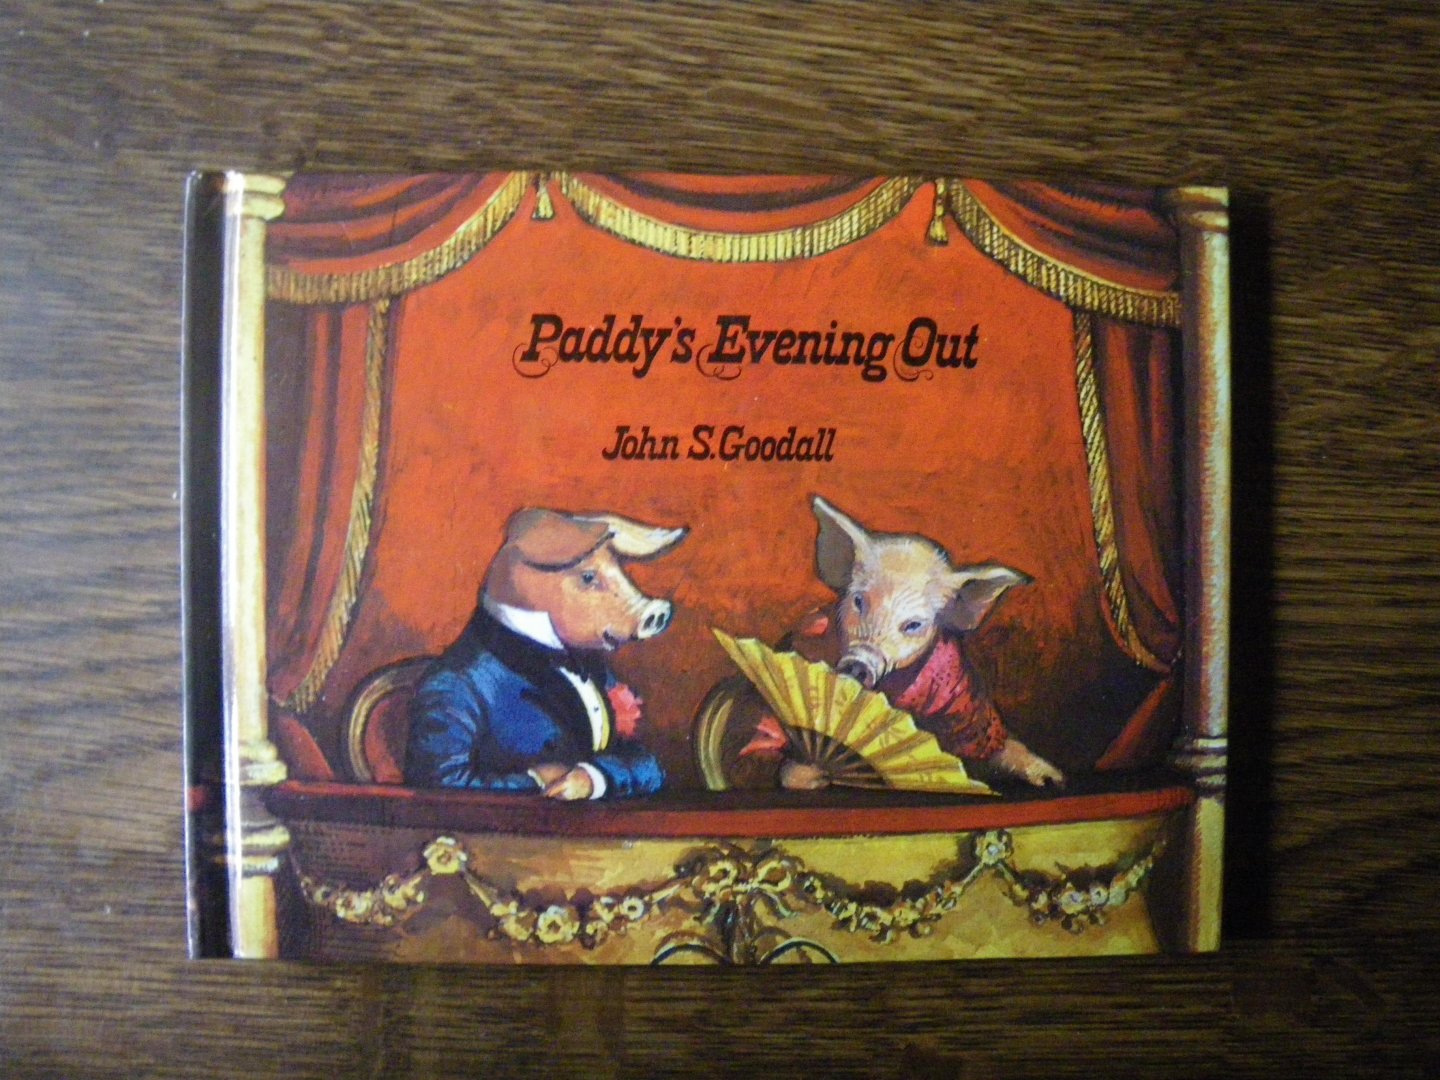 Goodall, John S - Paddy's Evening Out